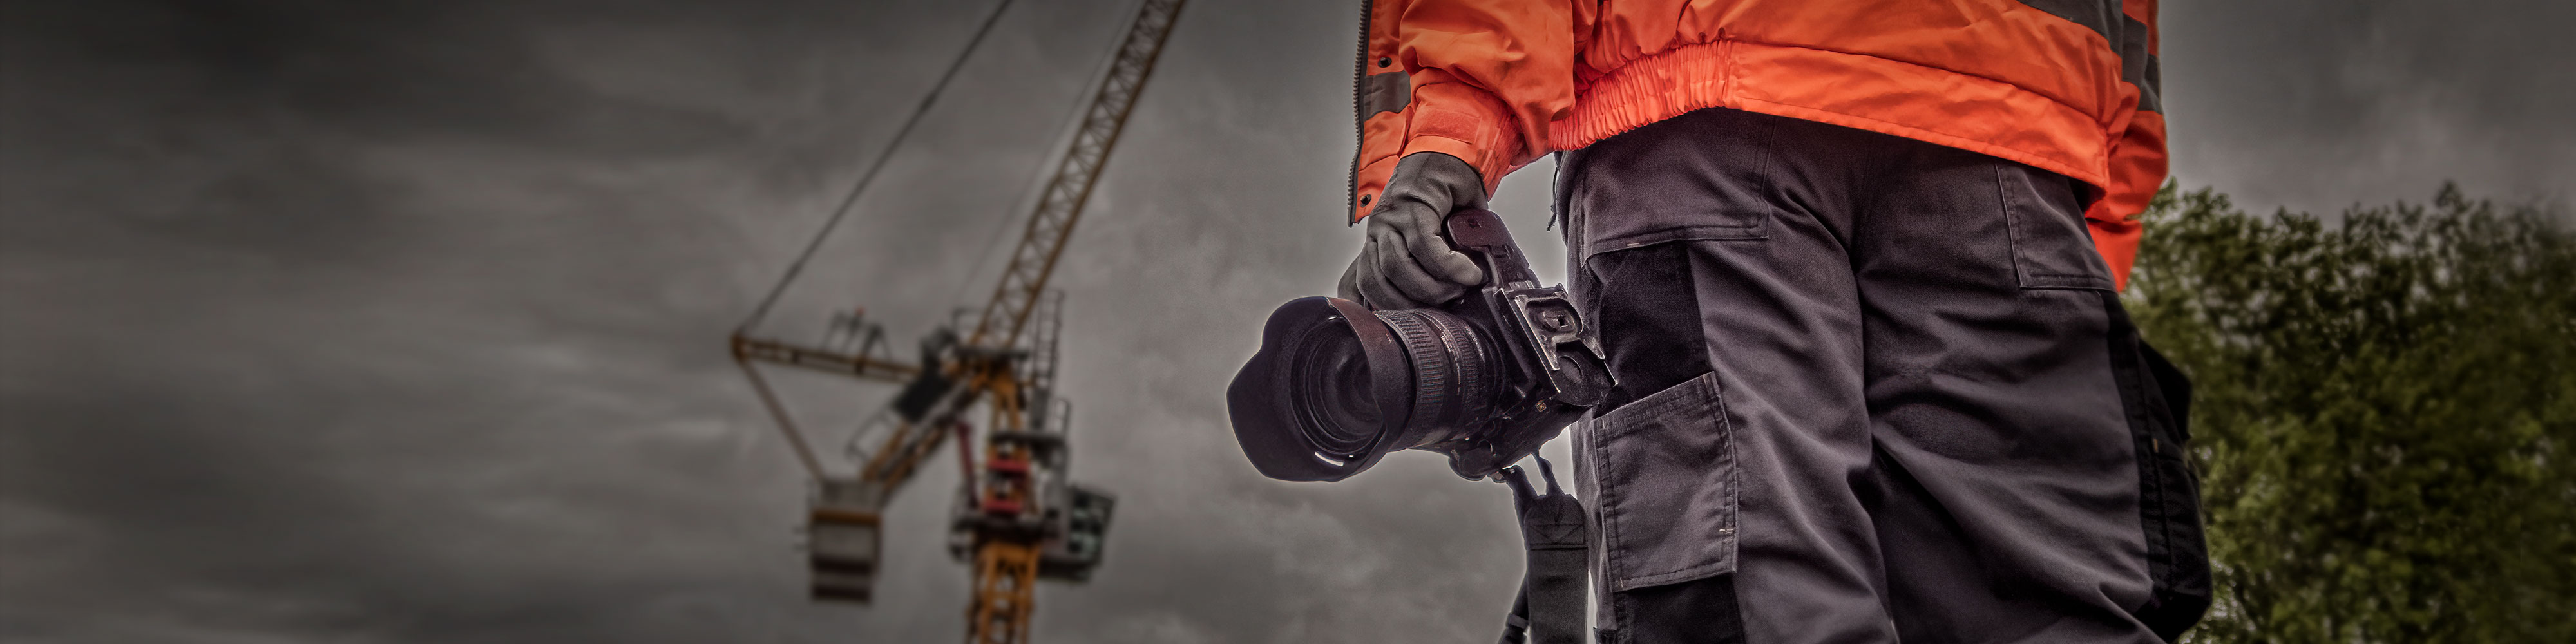 Commercial photographer holding a camera on a construction site